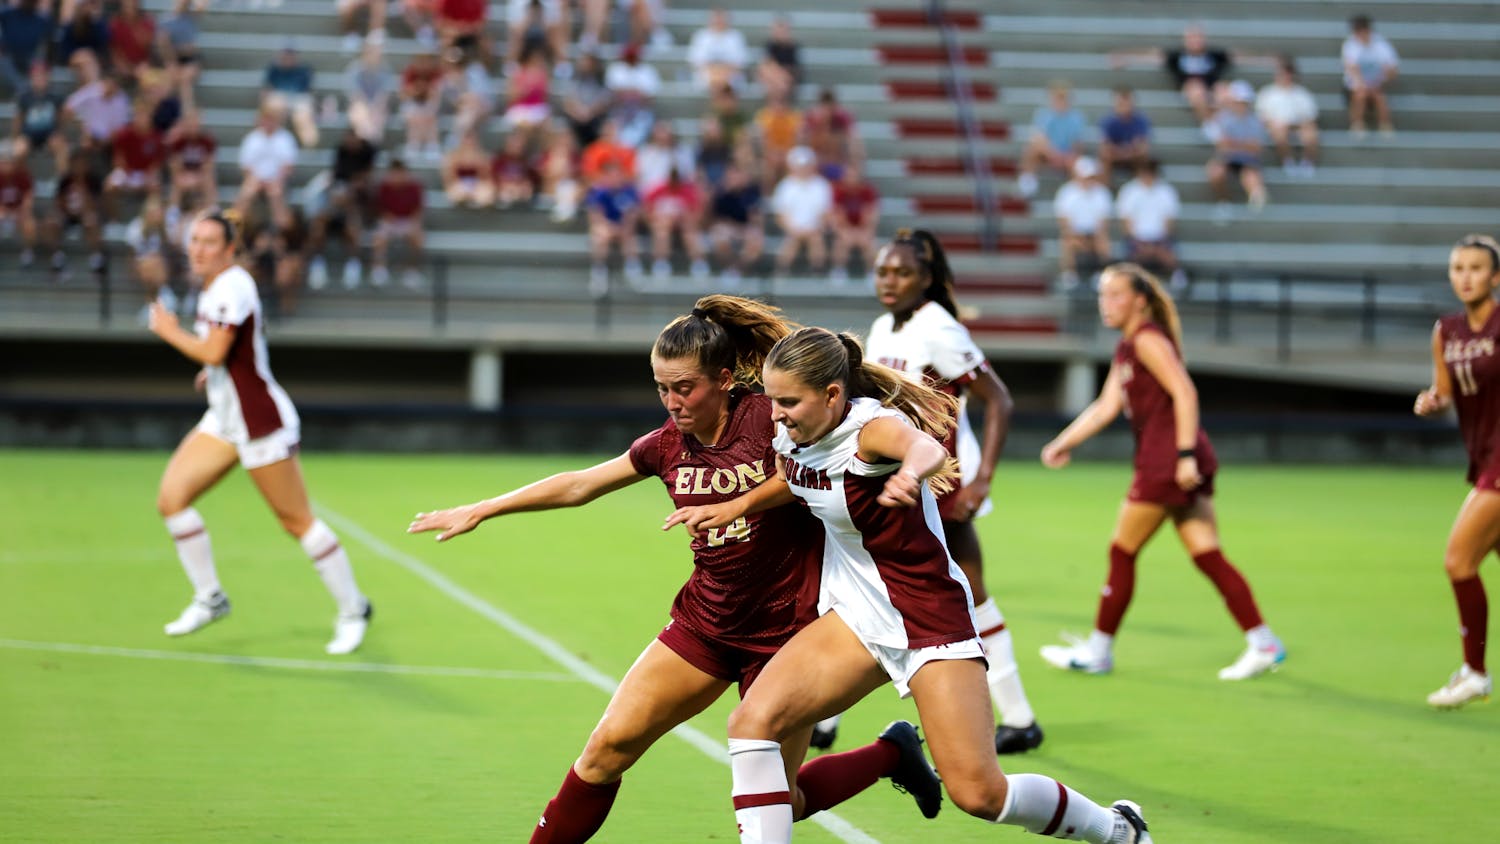 Freshman midfielder Cuyler Zulauf fights to retrieve the ball for the South Carolina Gamecocks on Aug. 31, 2023. The South Carolina Gamecocks took on Elon for their first home game of the season at Stone Stadium and won 2-0.&nbsp;